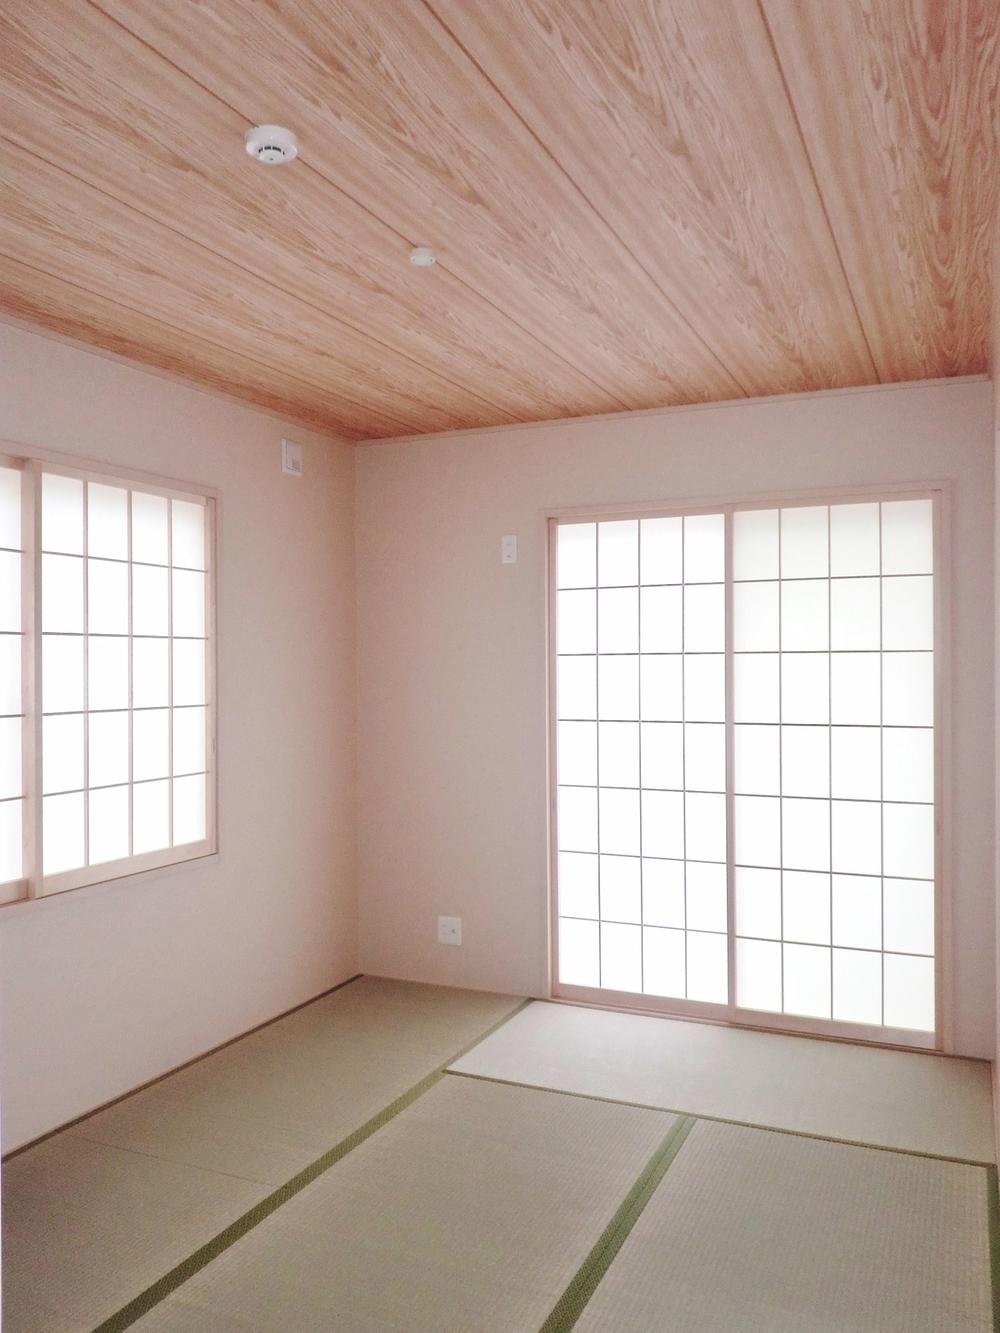 Other introspection. South-facing, Bright and serene Japanese-style